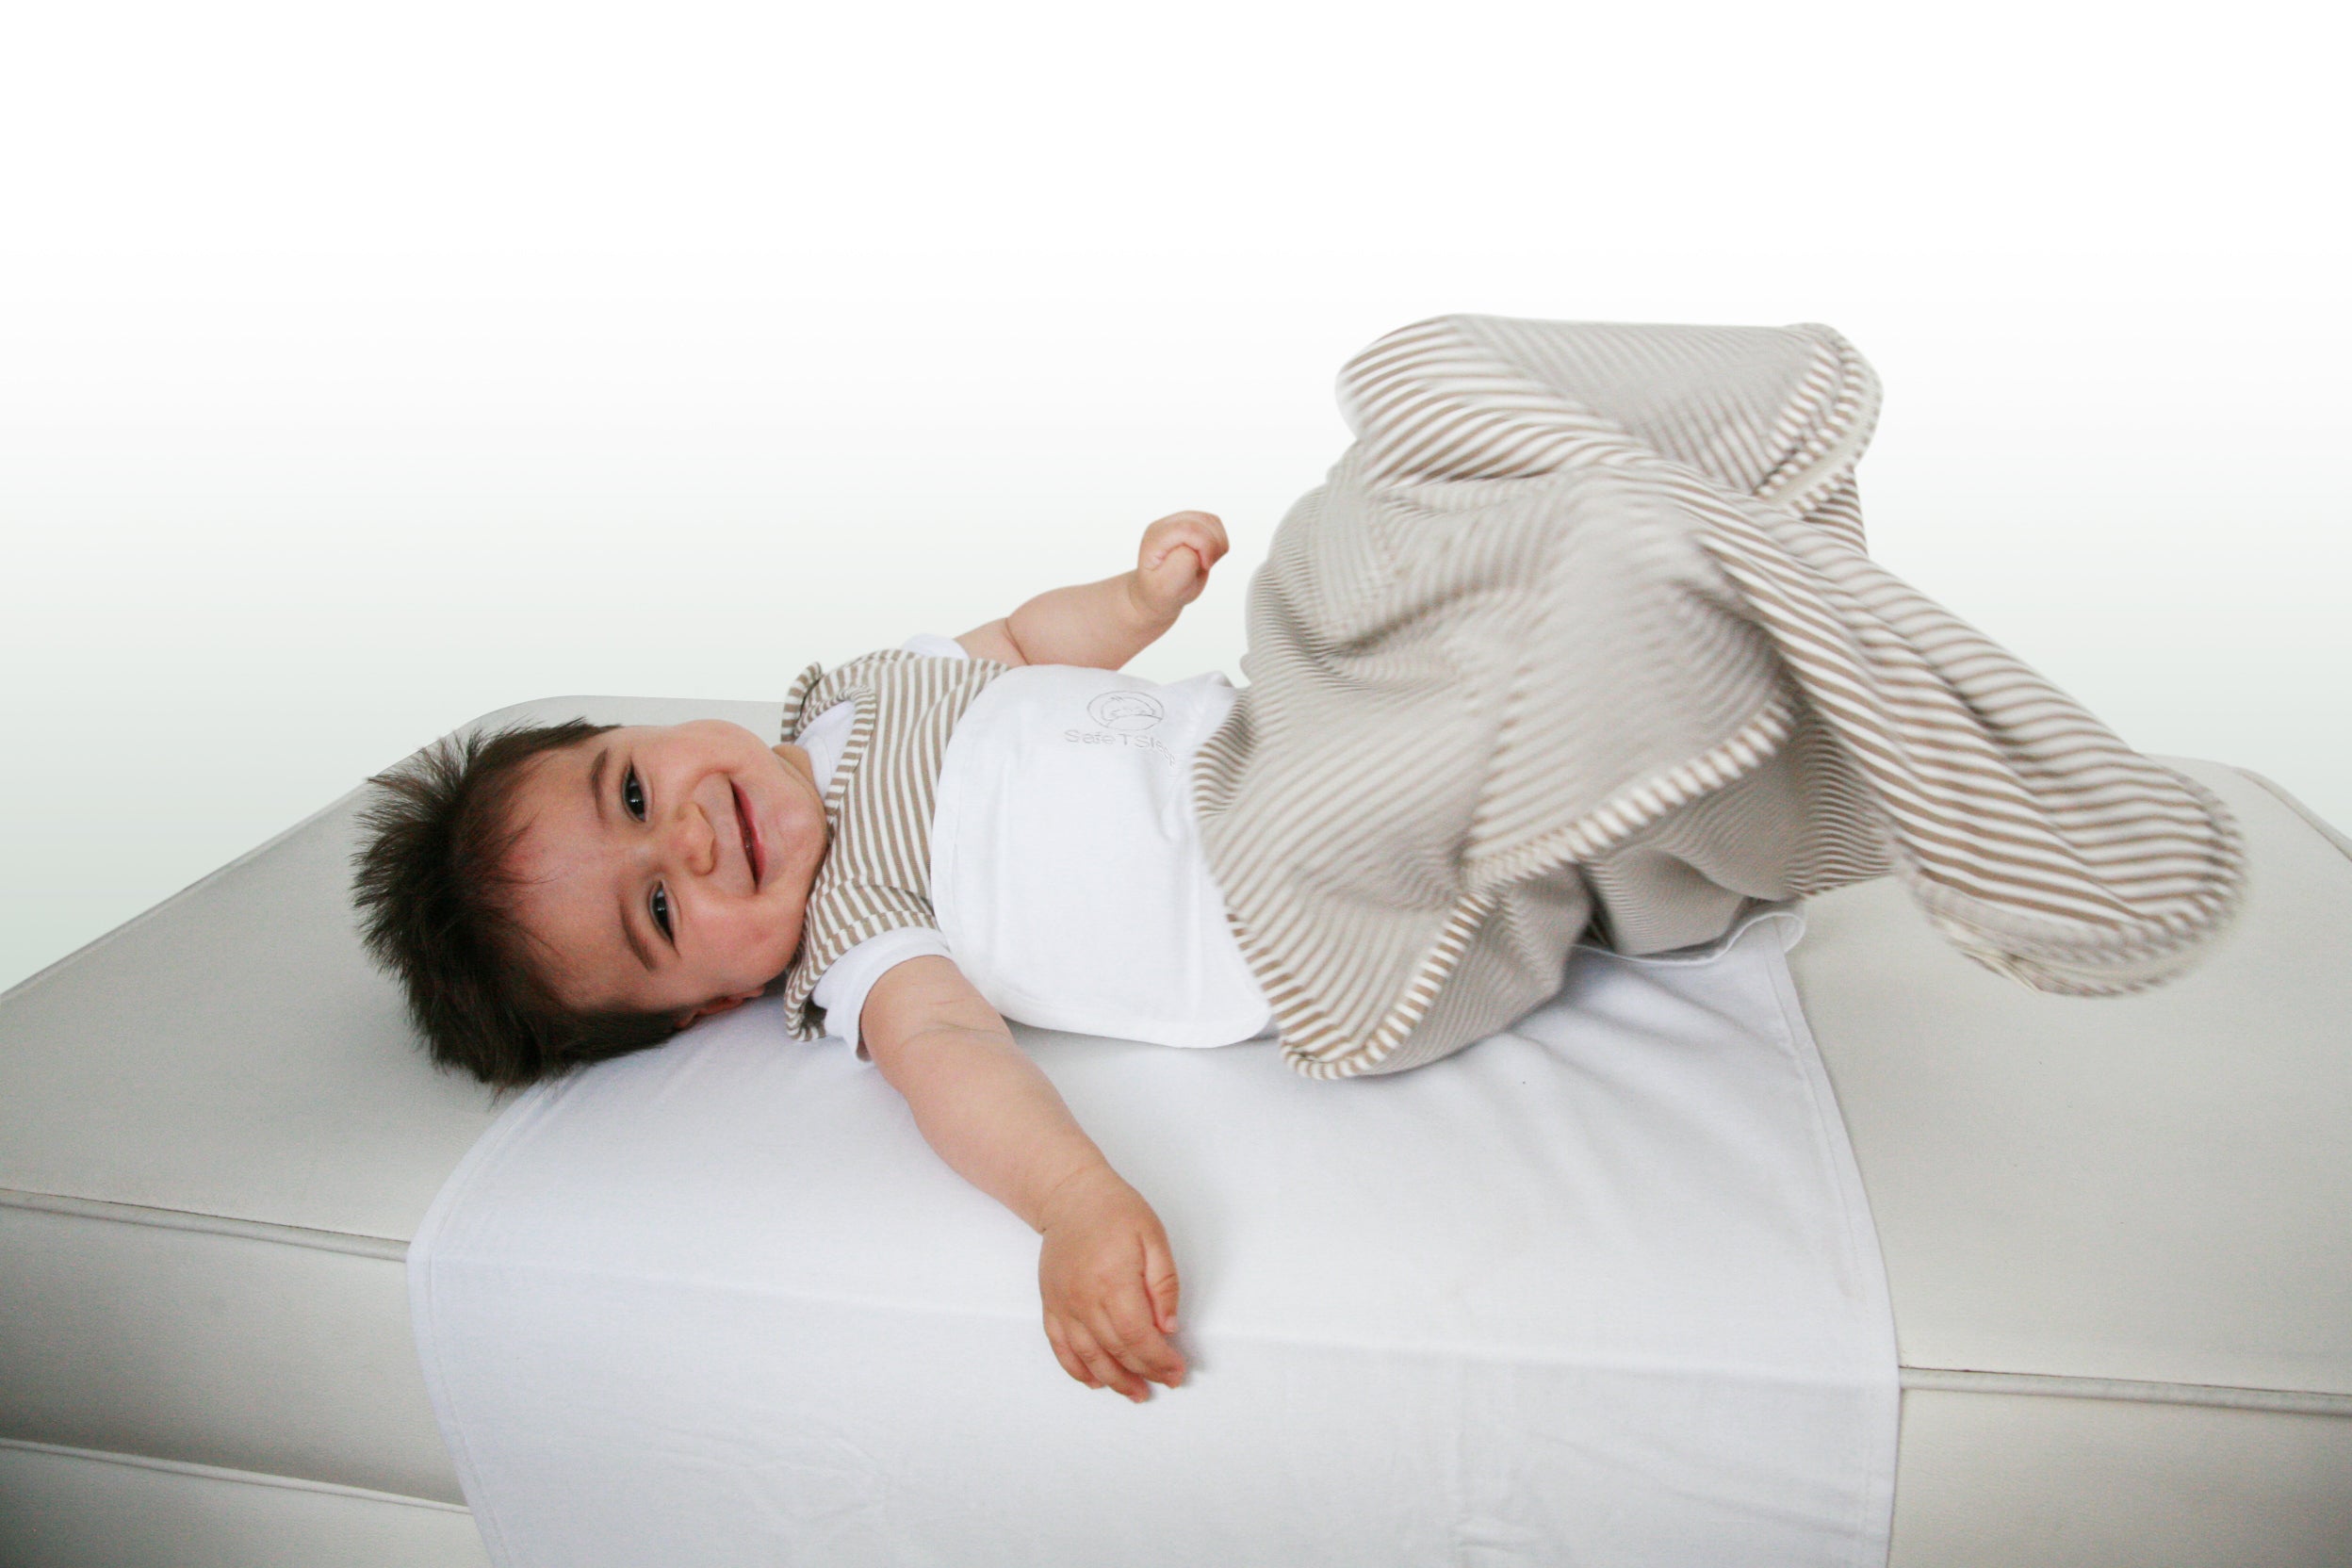 Sleepwrap baby swaddle in a single bed